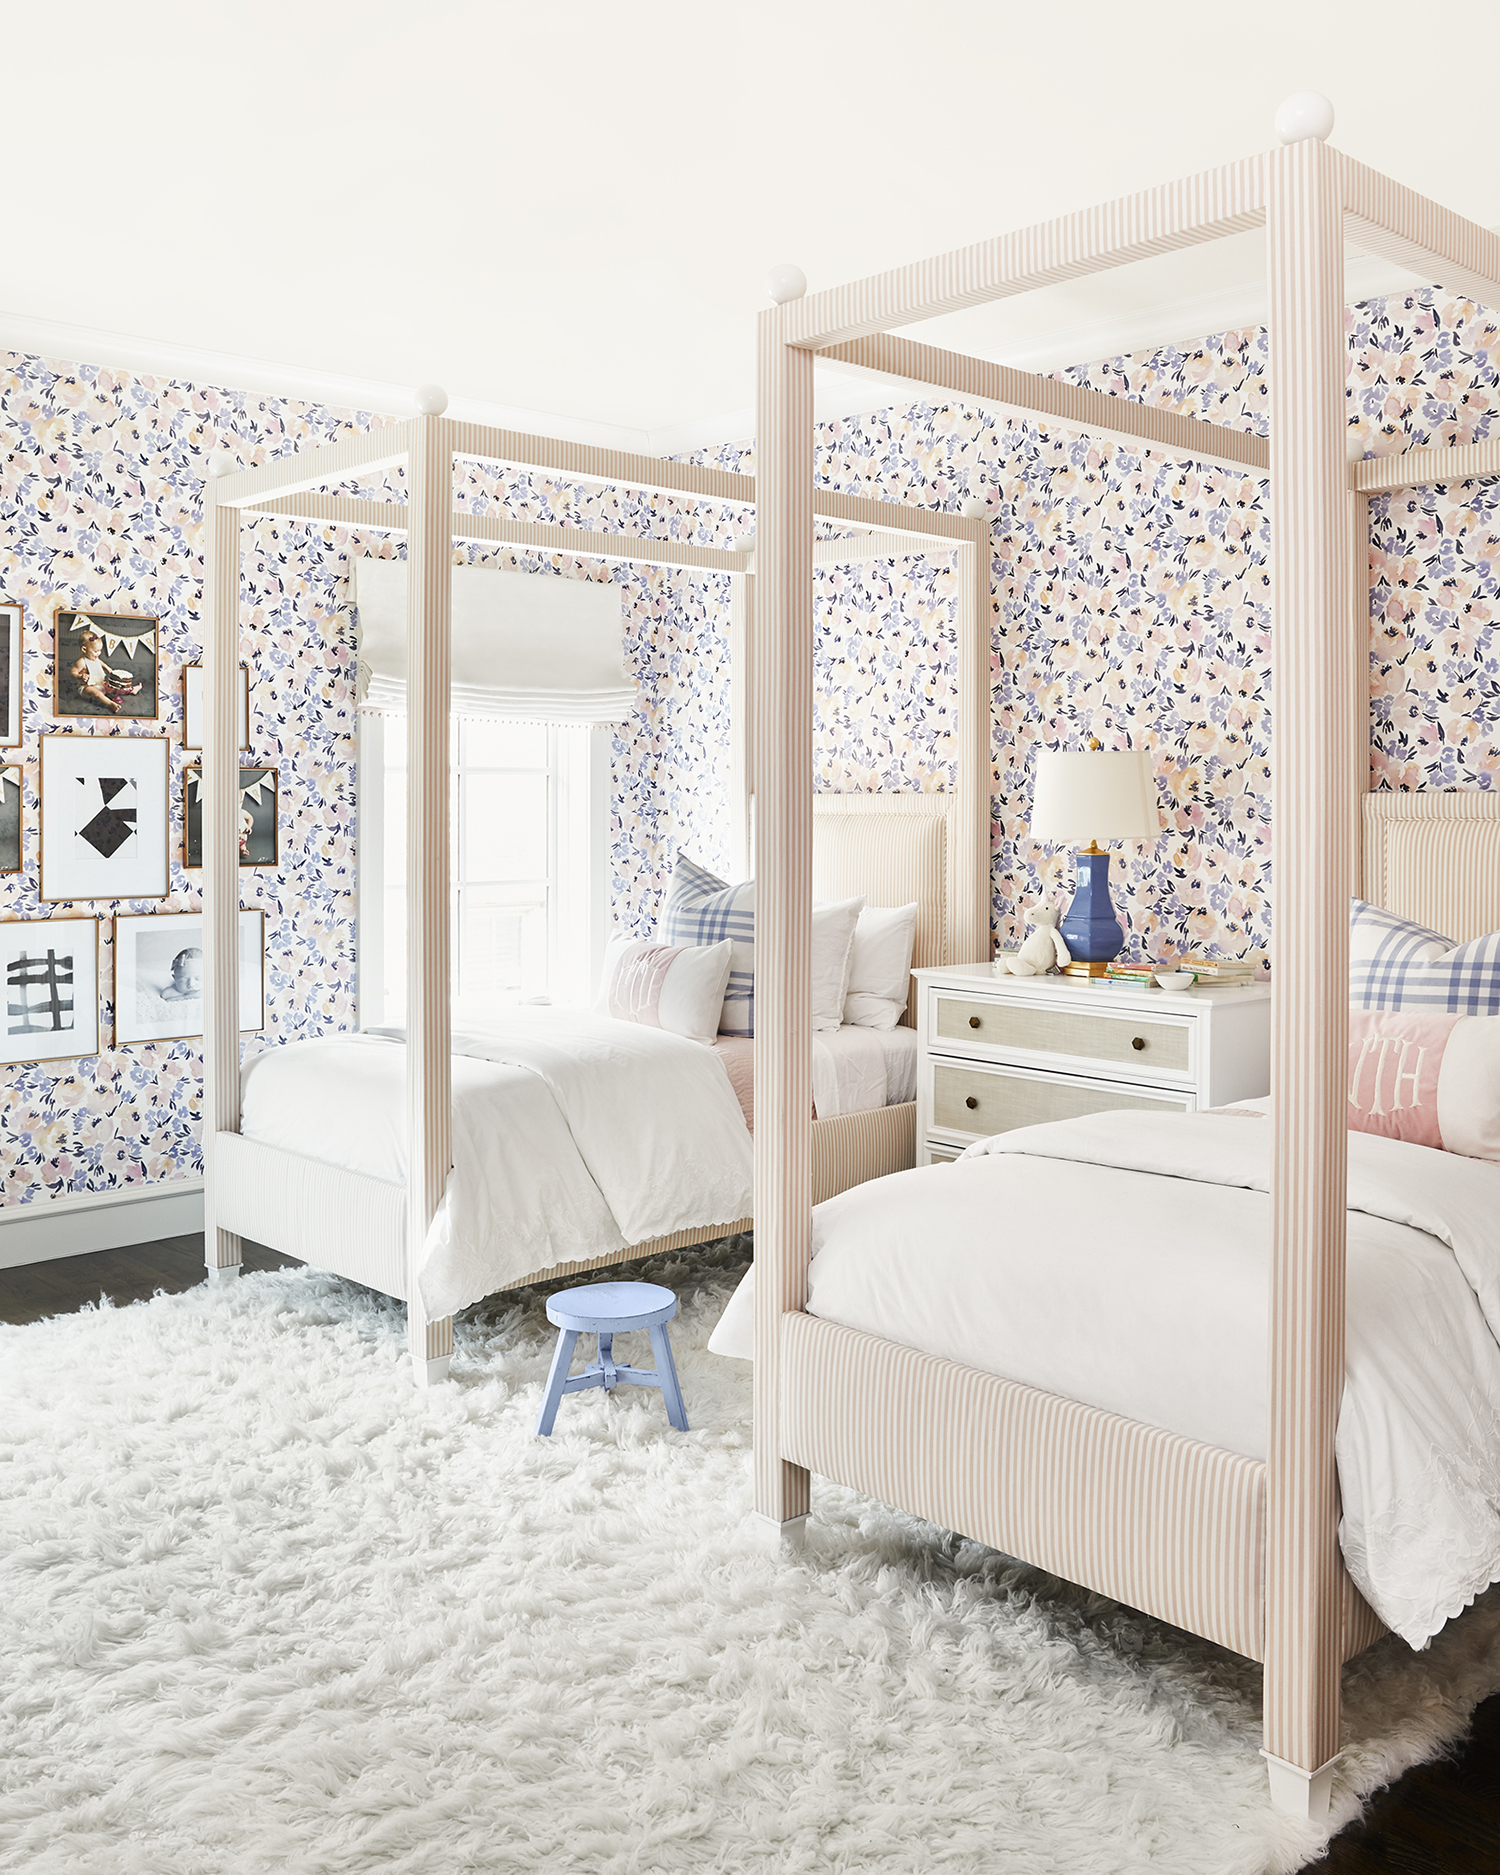 Matching beds in child's bedroom